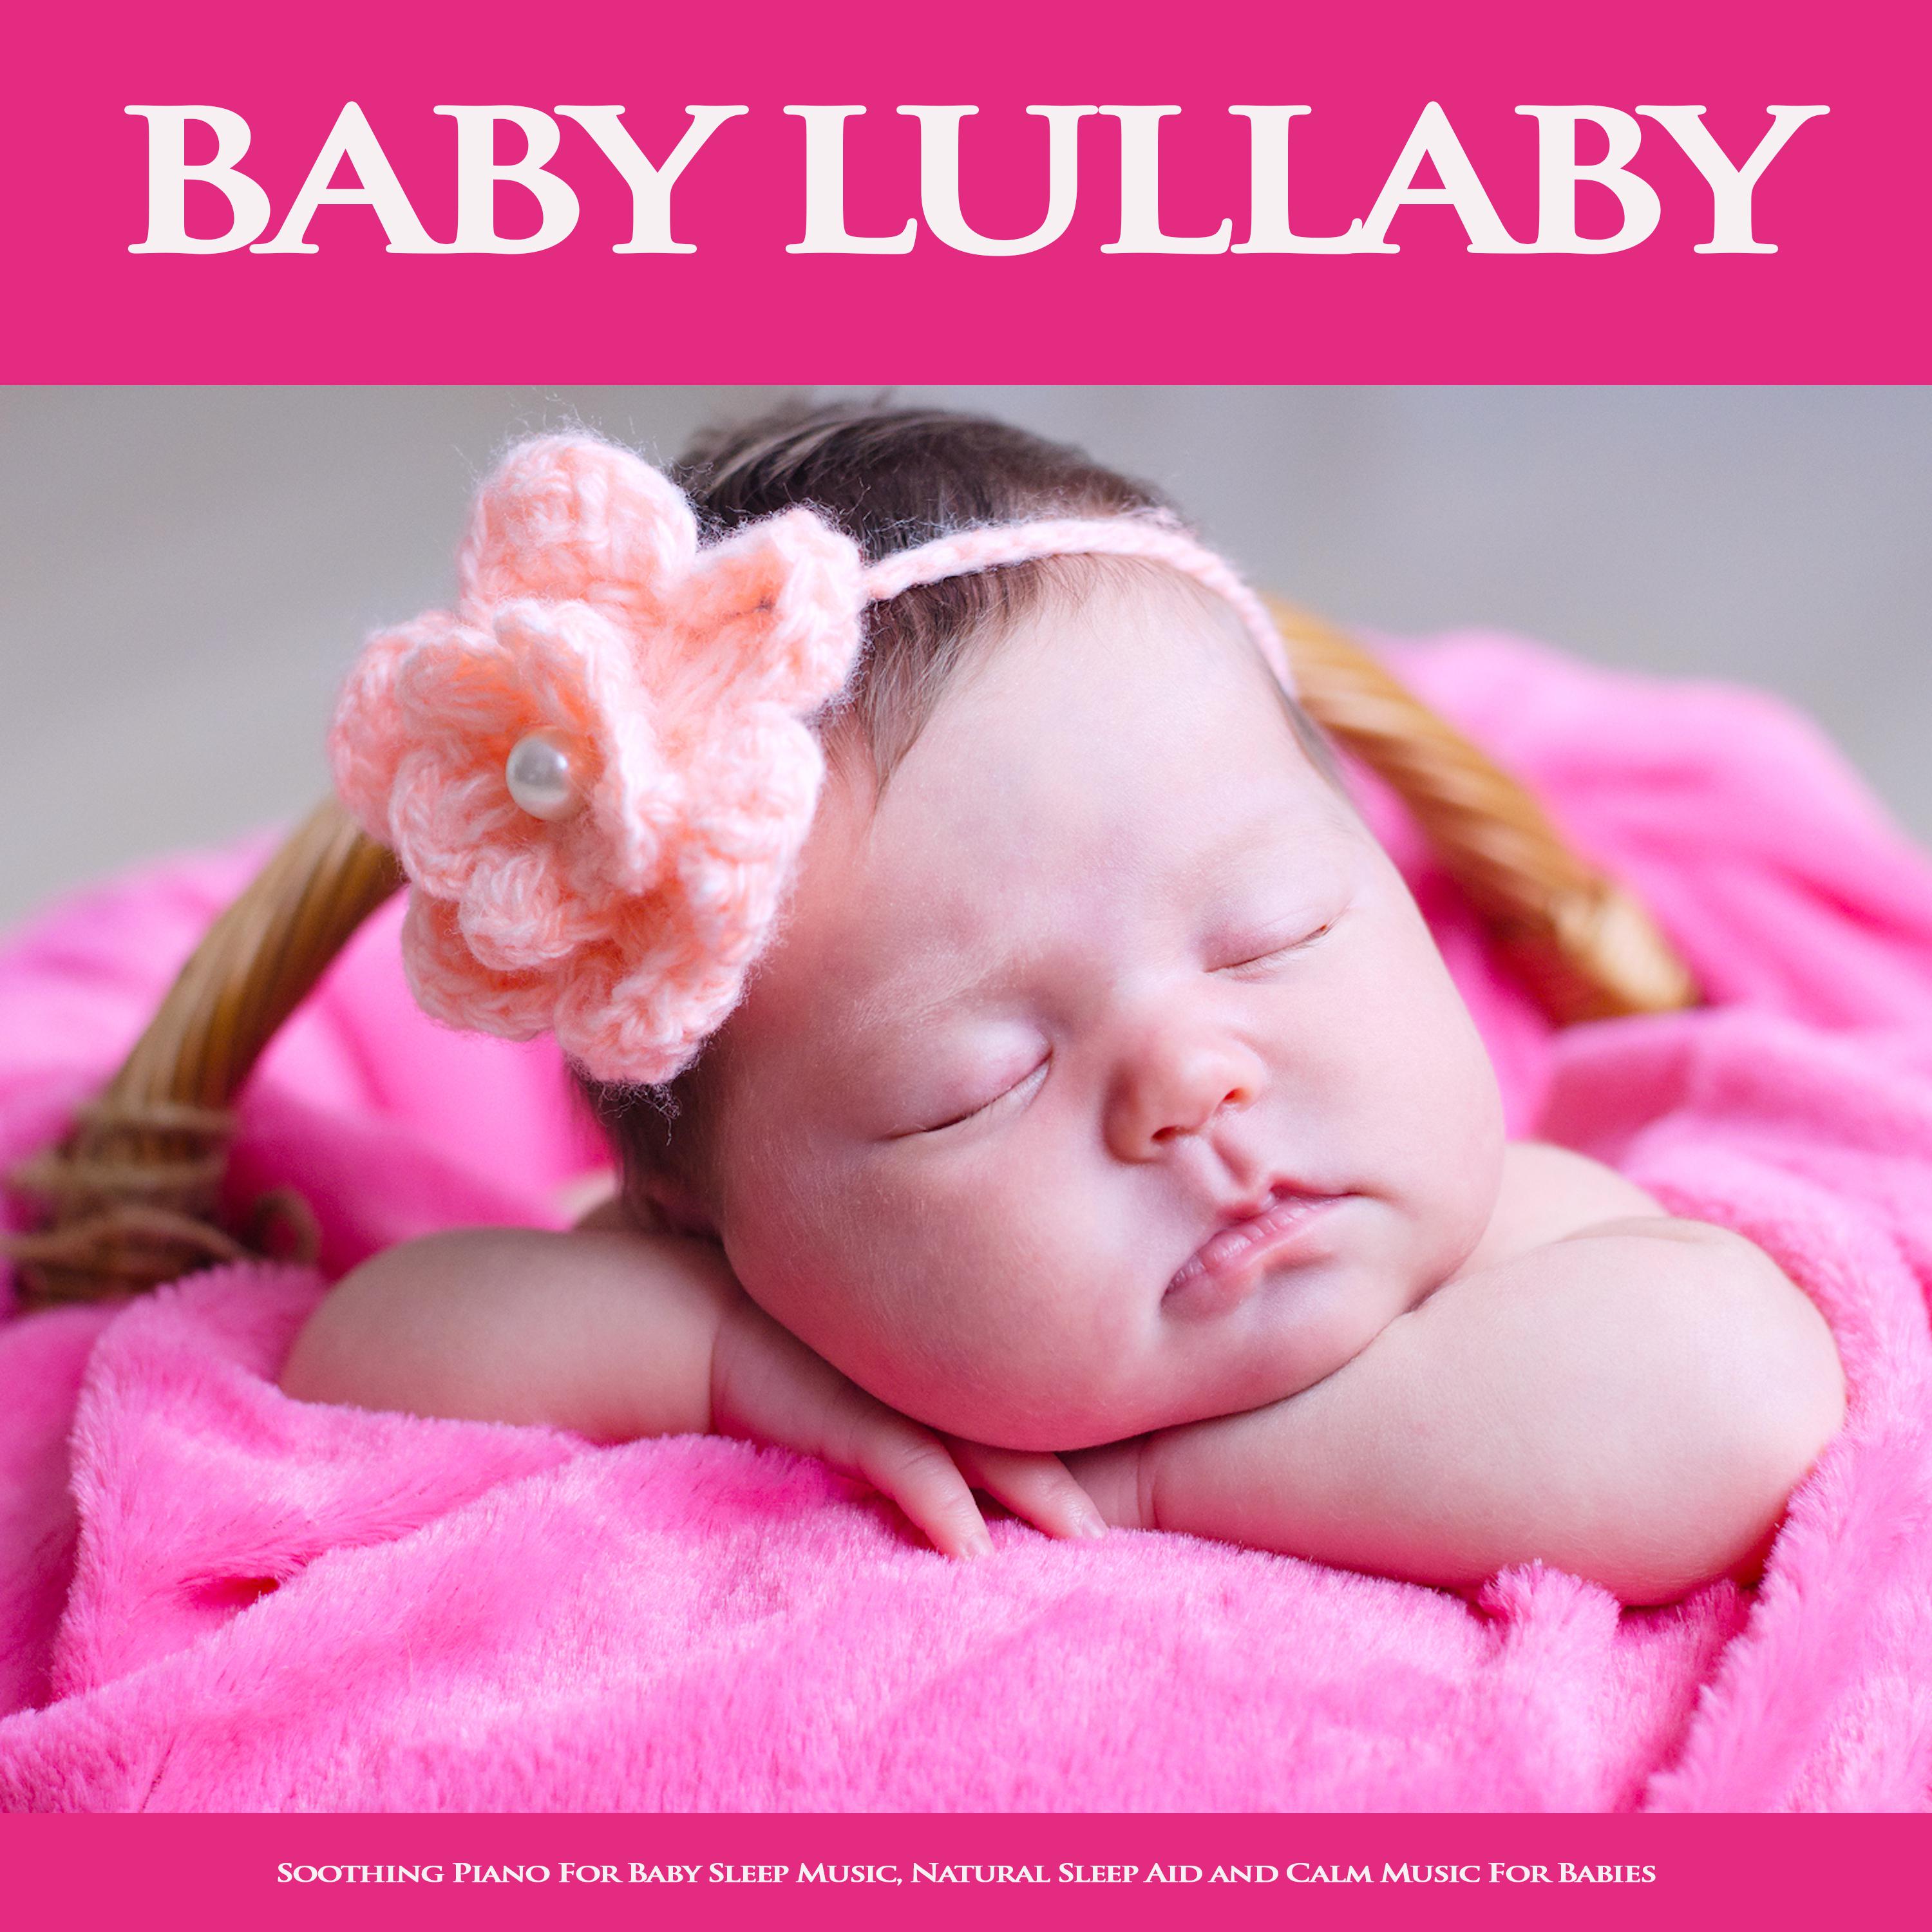 Baby Lullaby - Soft Piano Music